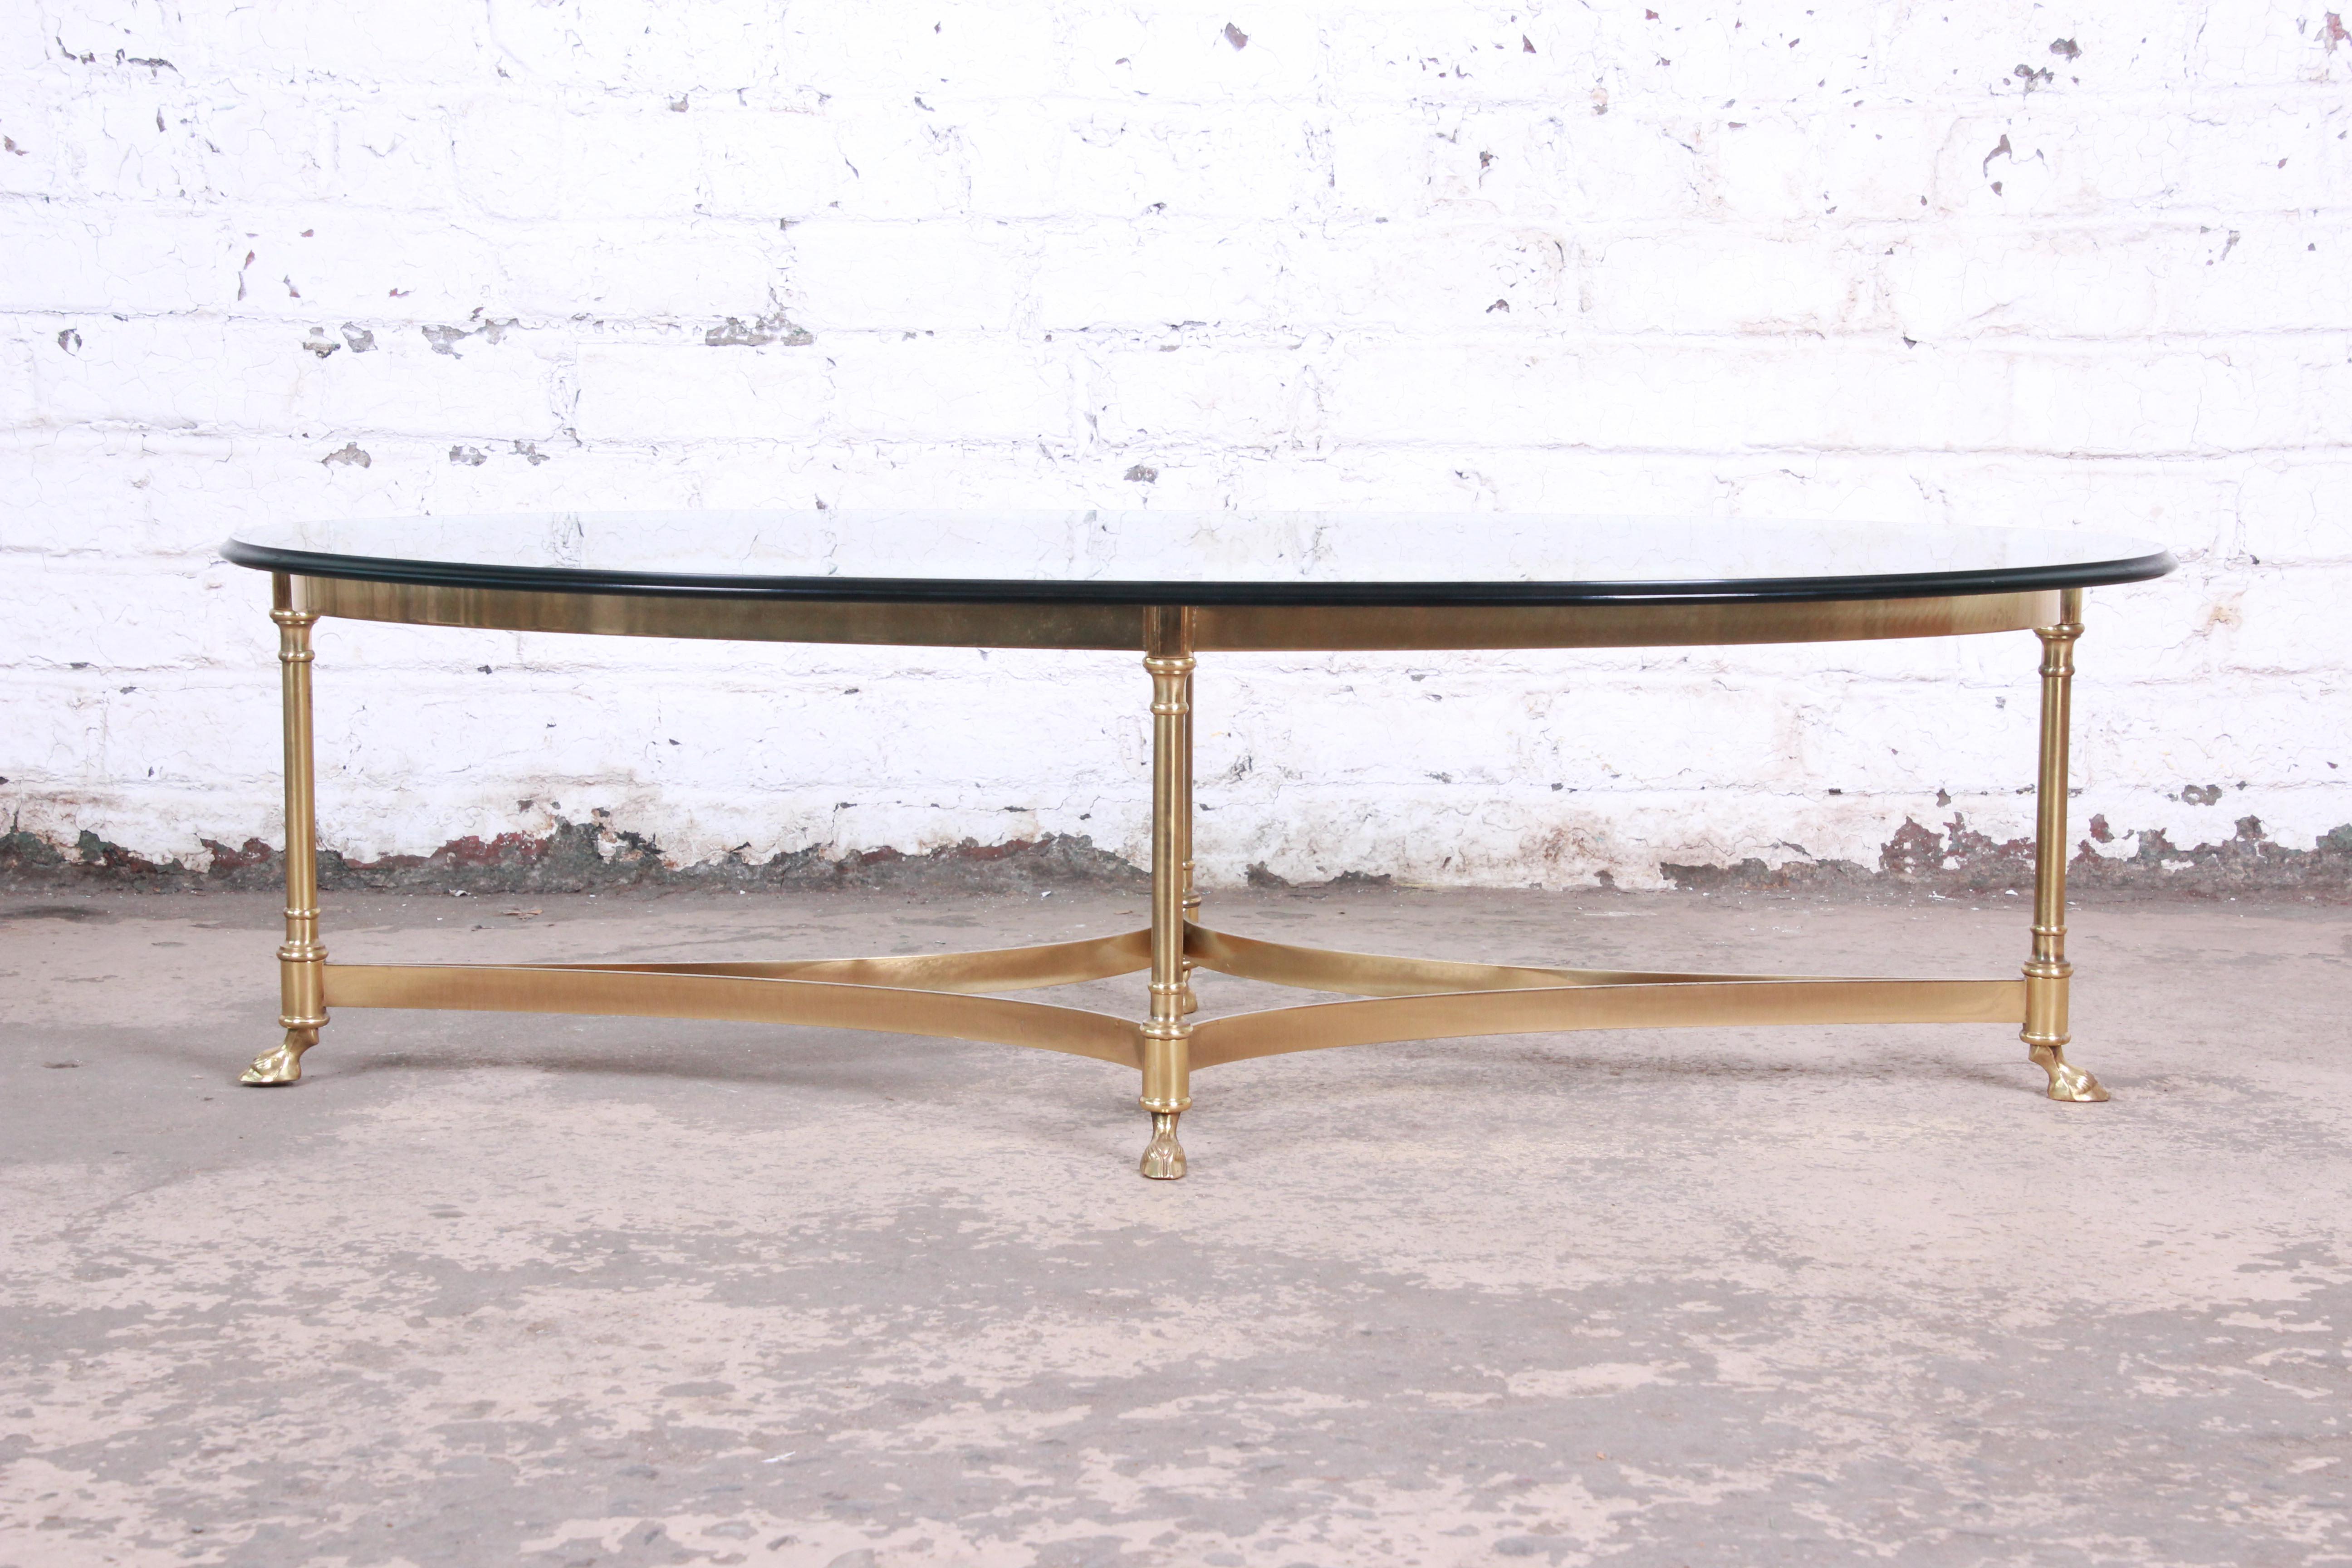 A gorgeous midcentury Hollywood Regency brass and glass coffee or cocktail table by Labarge. The table features a stylish brass base with curved stretchers and unique hooved feet. The beveled glass top is in very good condition. Overall the table is